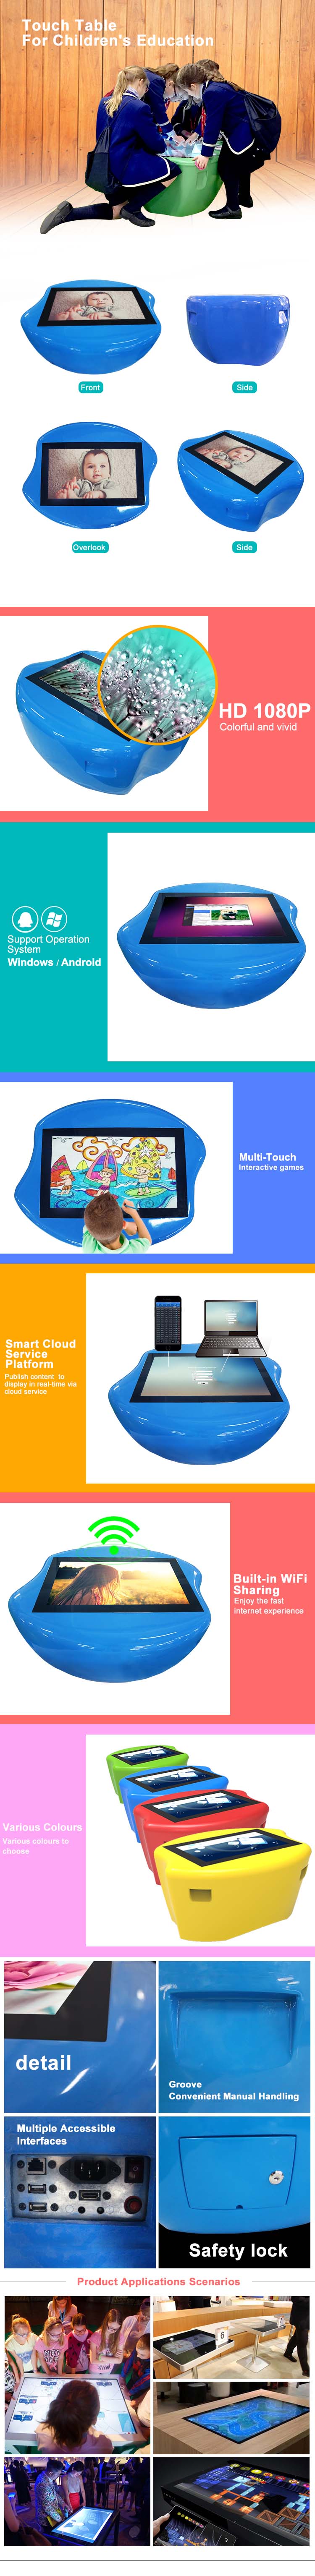 Model Number: MWE609 Multi PointsTouch Ineractive Touch Screen Table